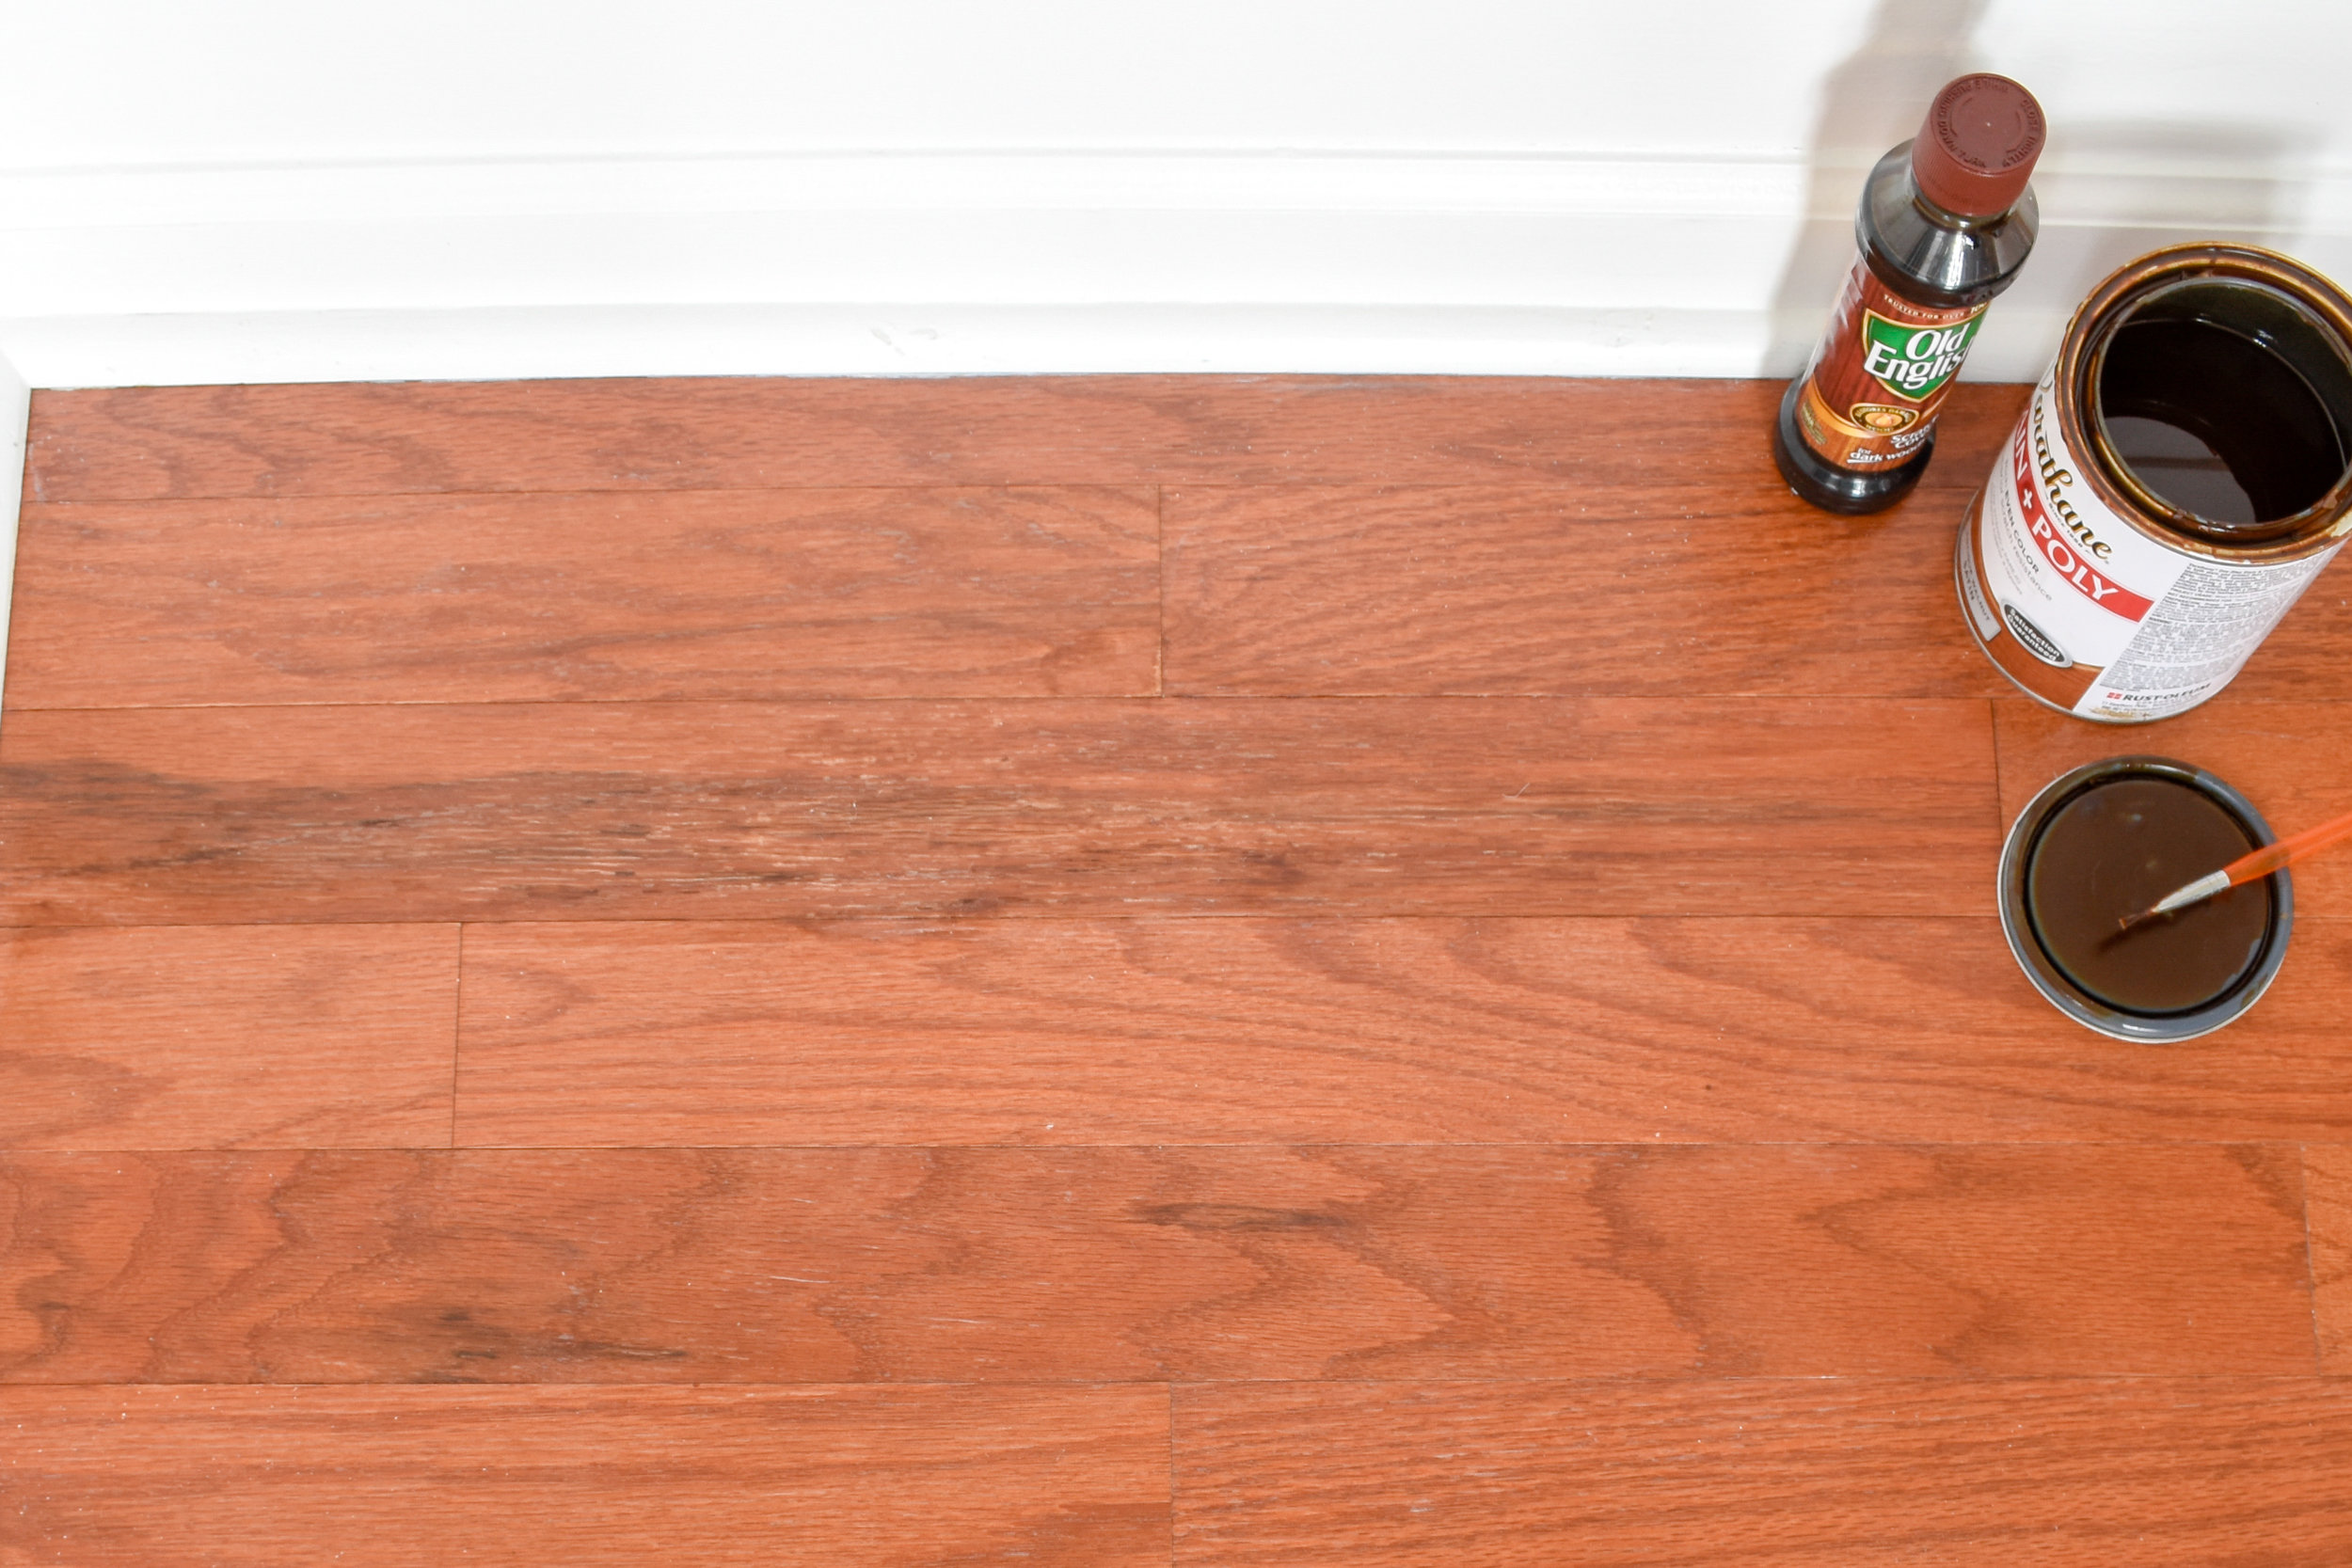 repairing wood flooring after condensation damage from  house plants